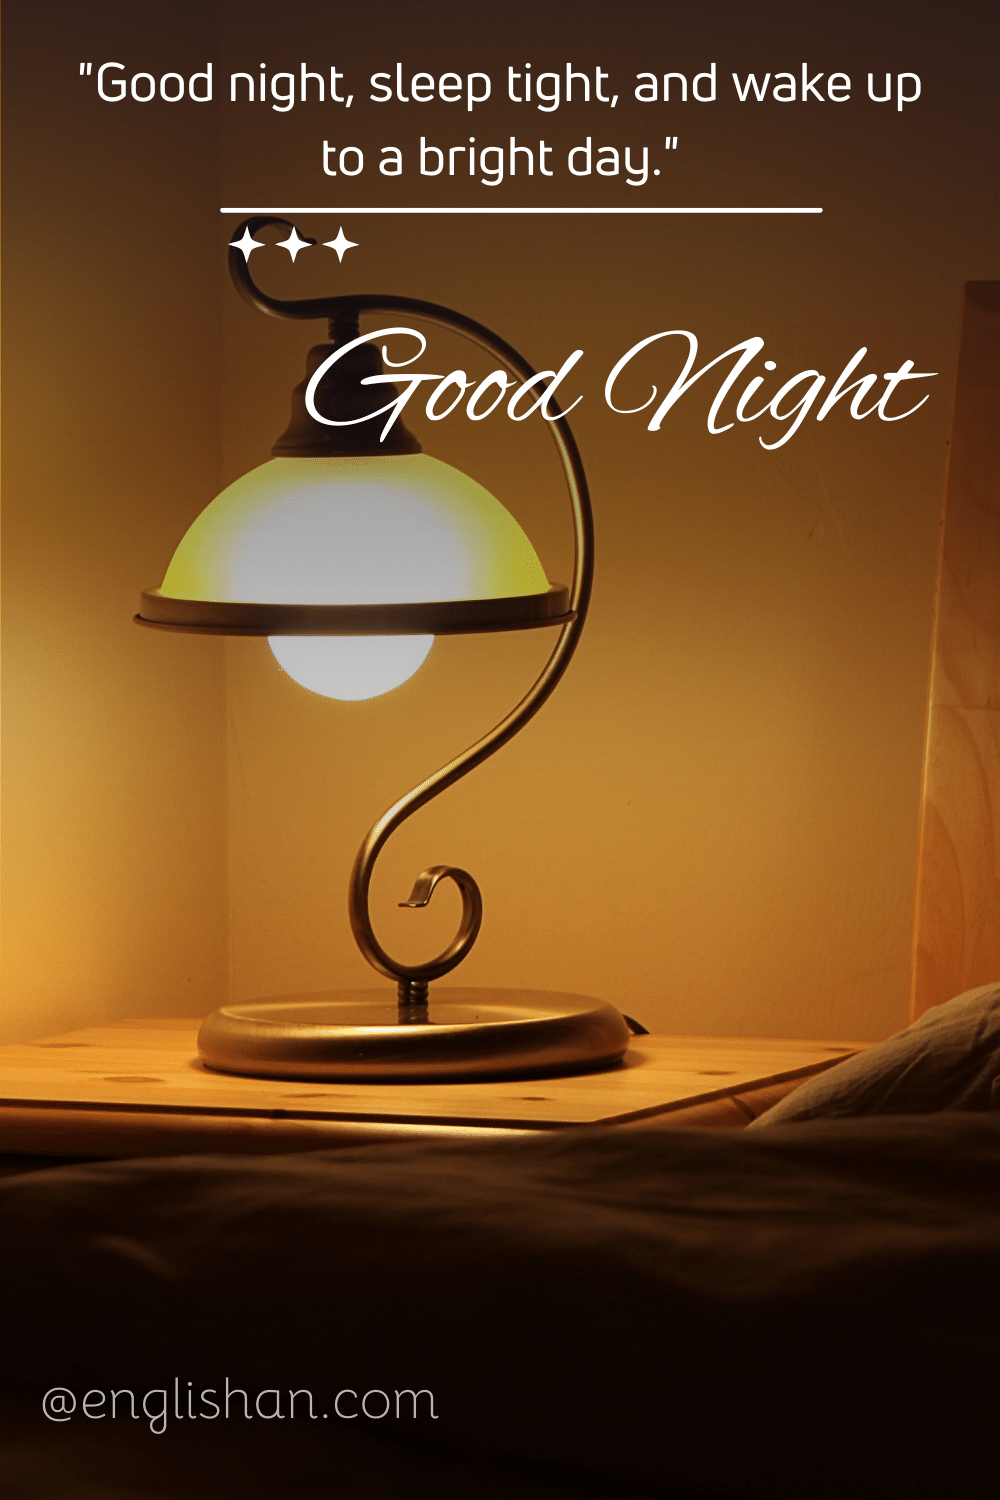 300 New Good Night Images, Wishes, Status, Quotes